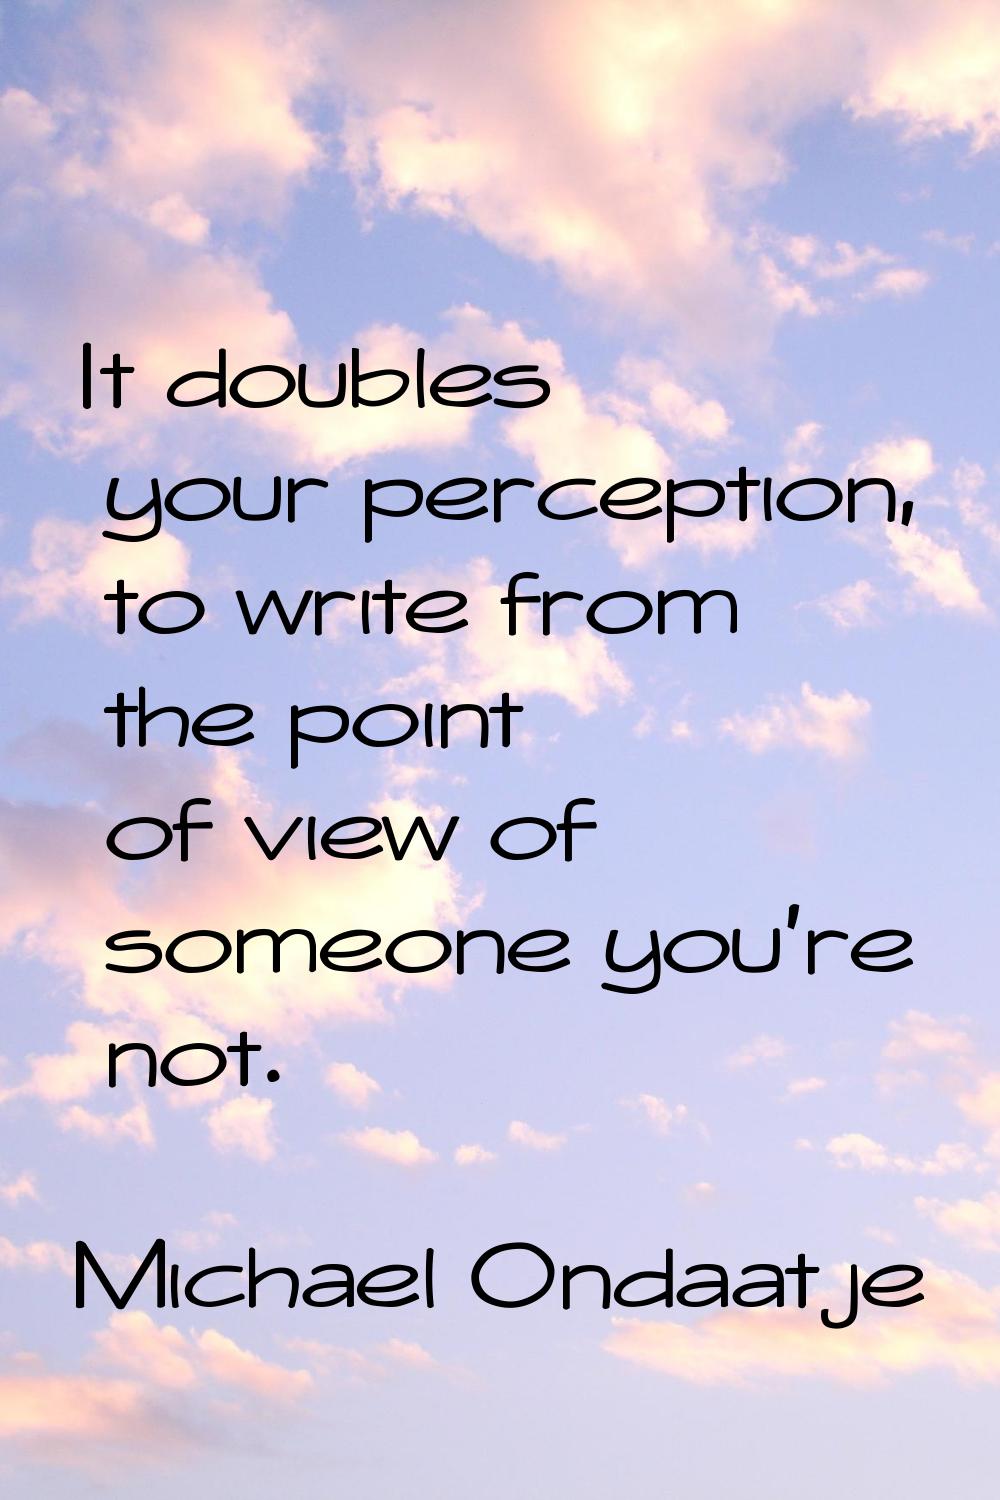 It doubles your perception, to write from the point of view of someone you're not.